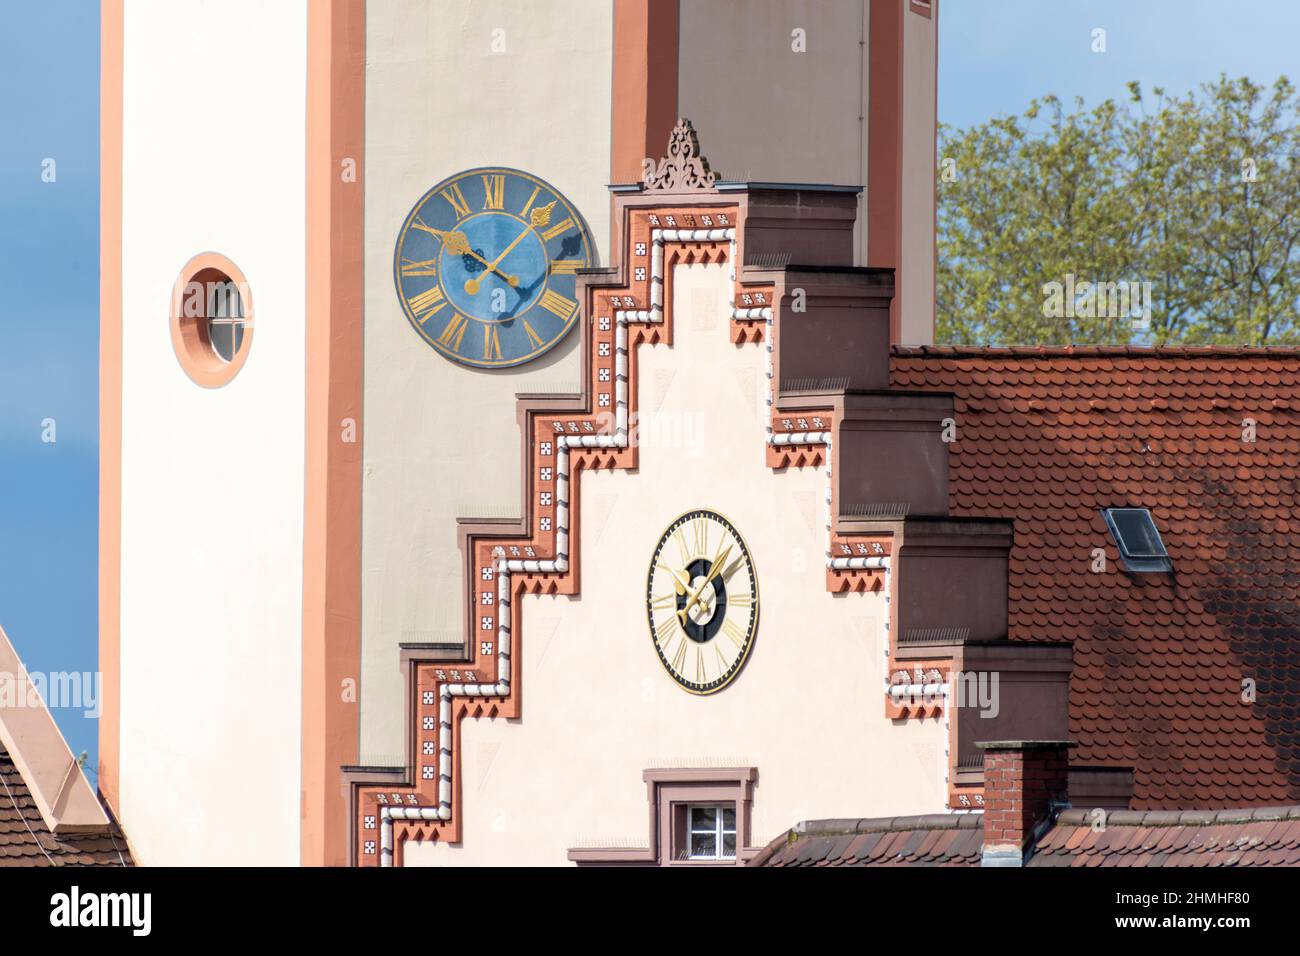 Germany, Baden-Württemberg, Karlsruhe, Durlach, town hall and church clock. Stock Photo